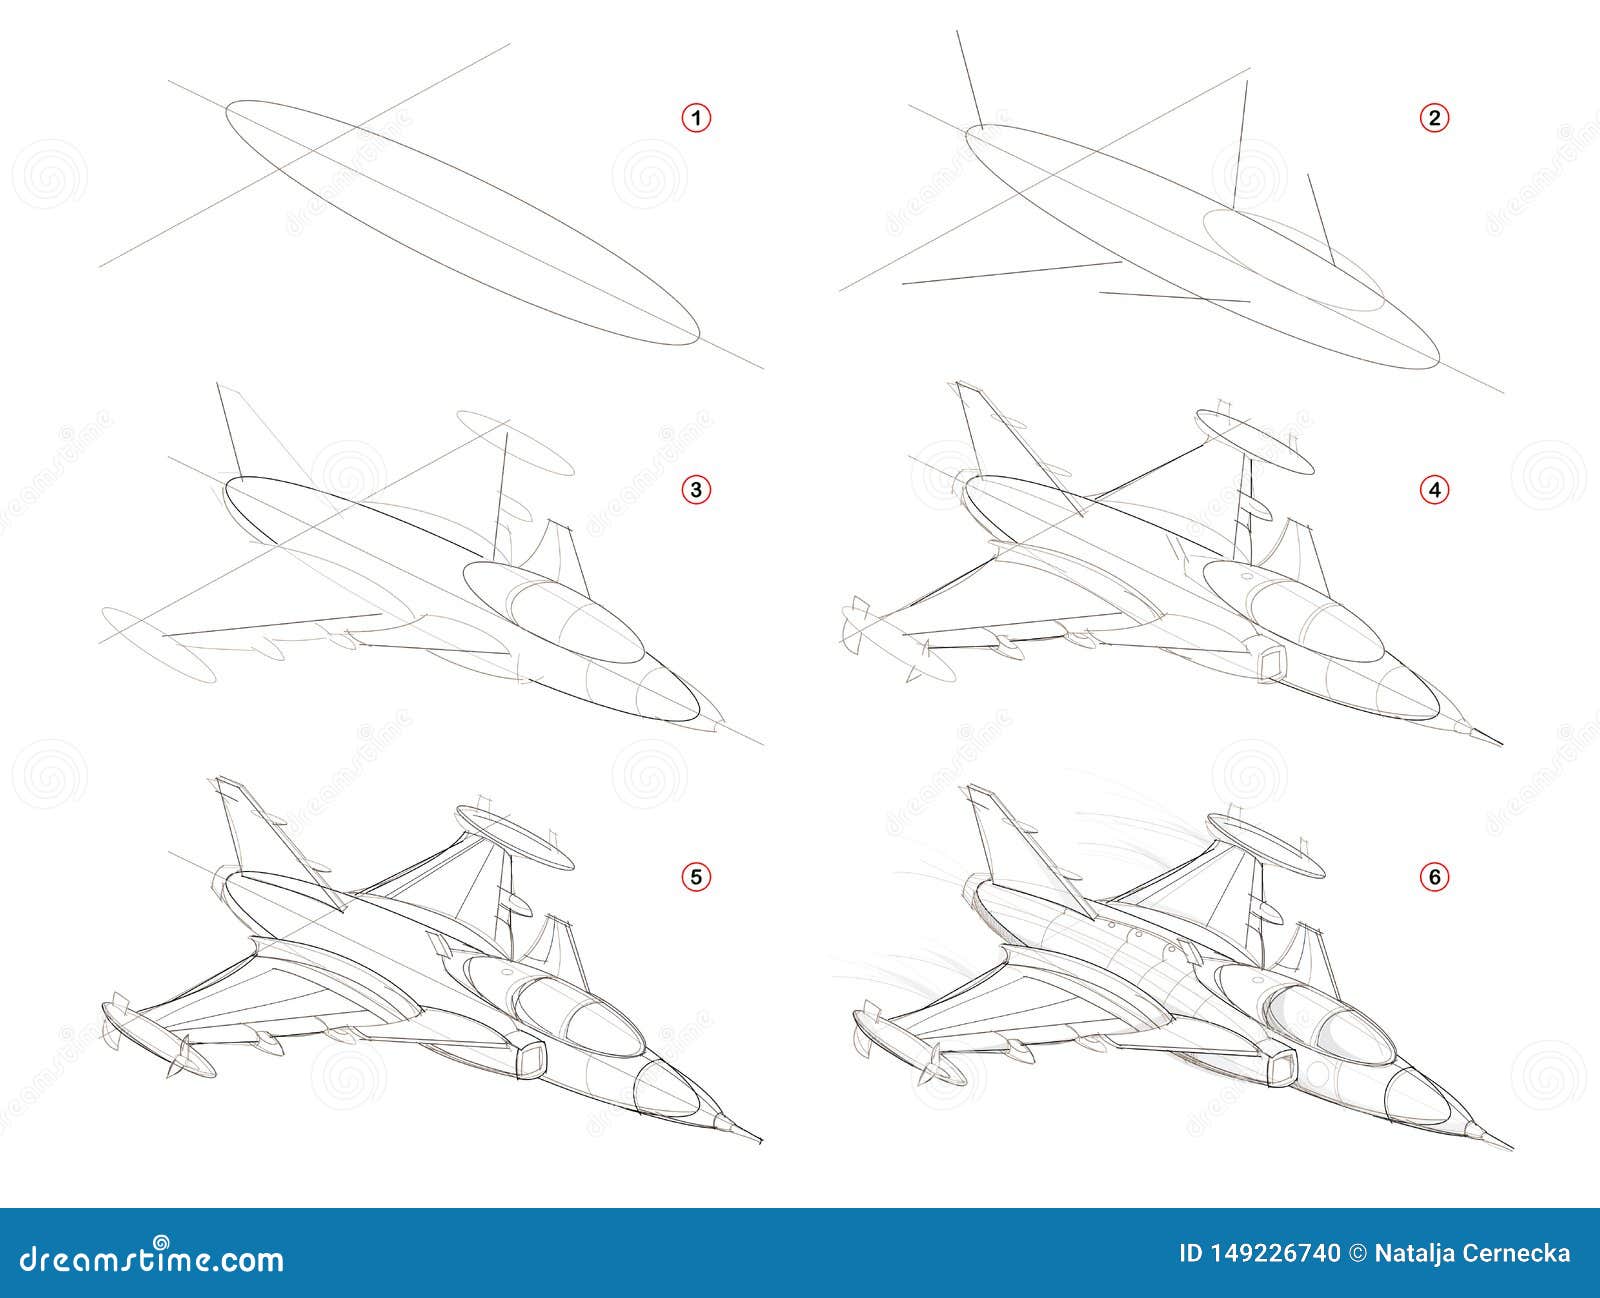 how to create step by step pencil drawing. page shows how to learn step by step draw fantastic space warship.